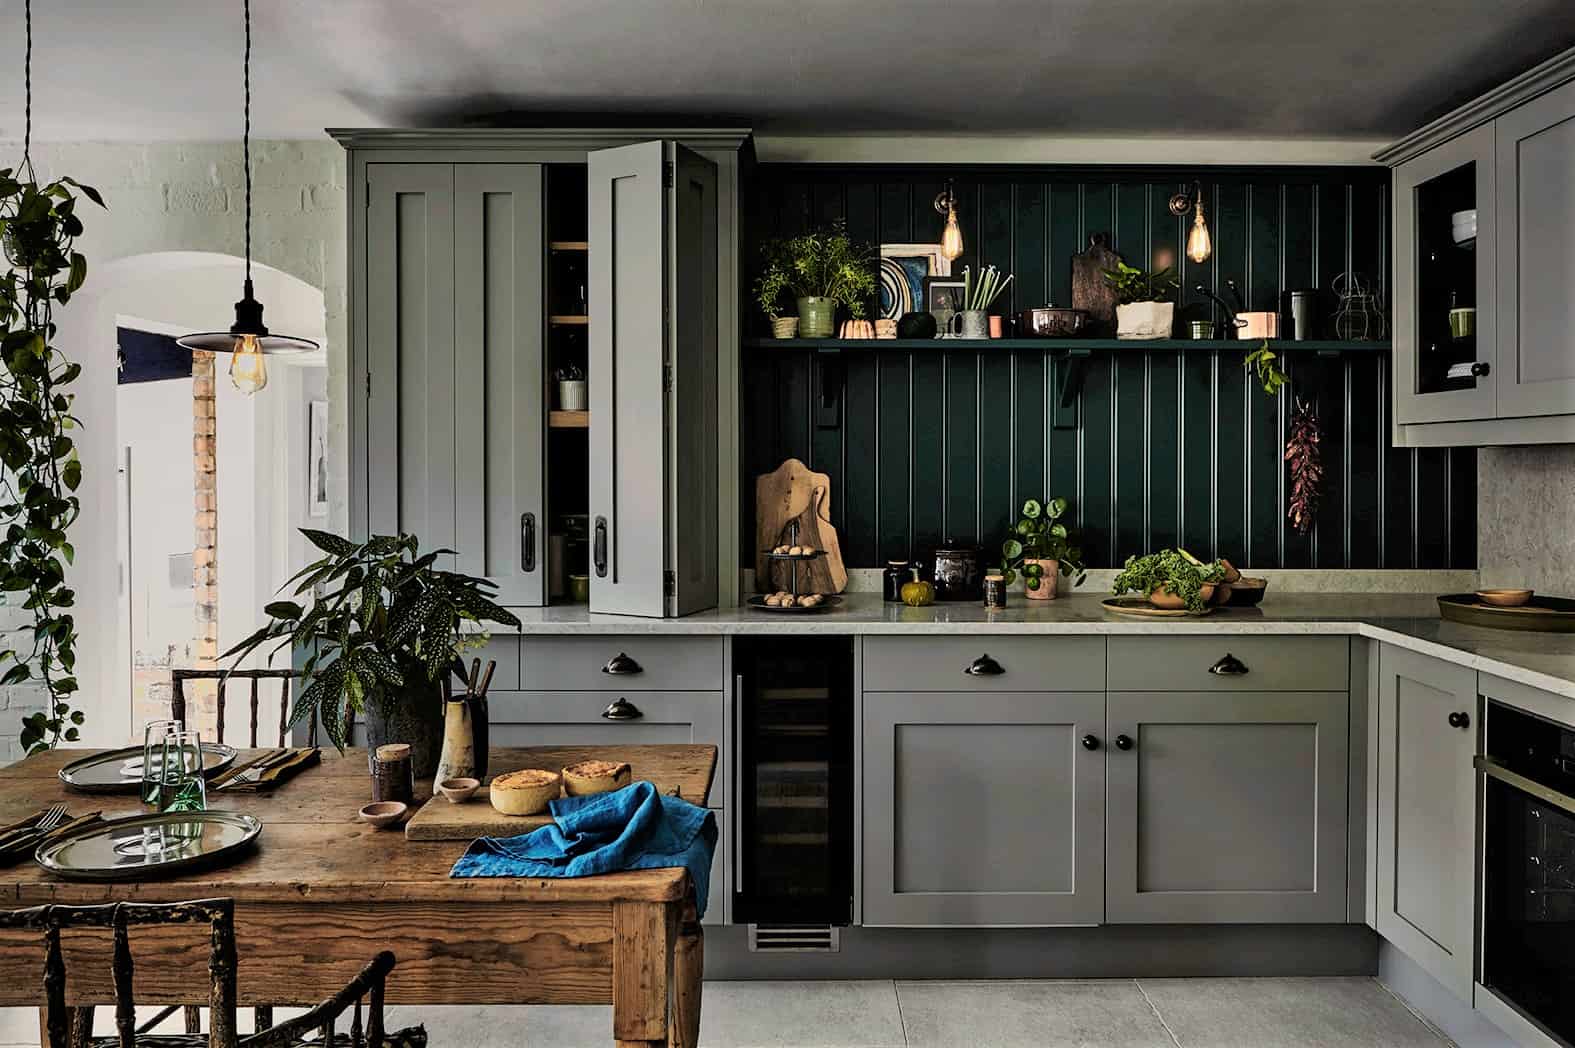 Painted Kitchens Modern Kitchen Colour   John Lewis of Hungerford